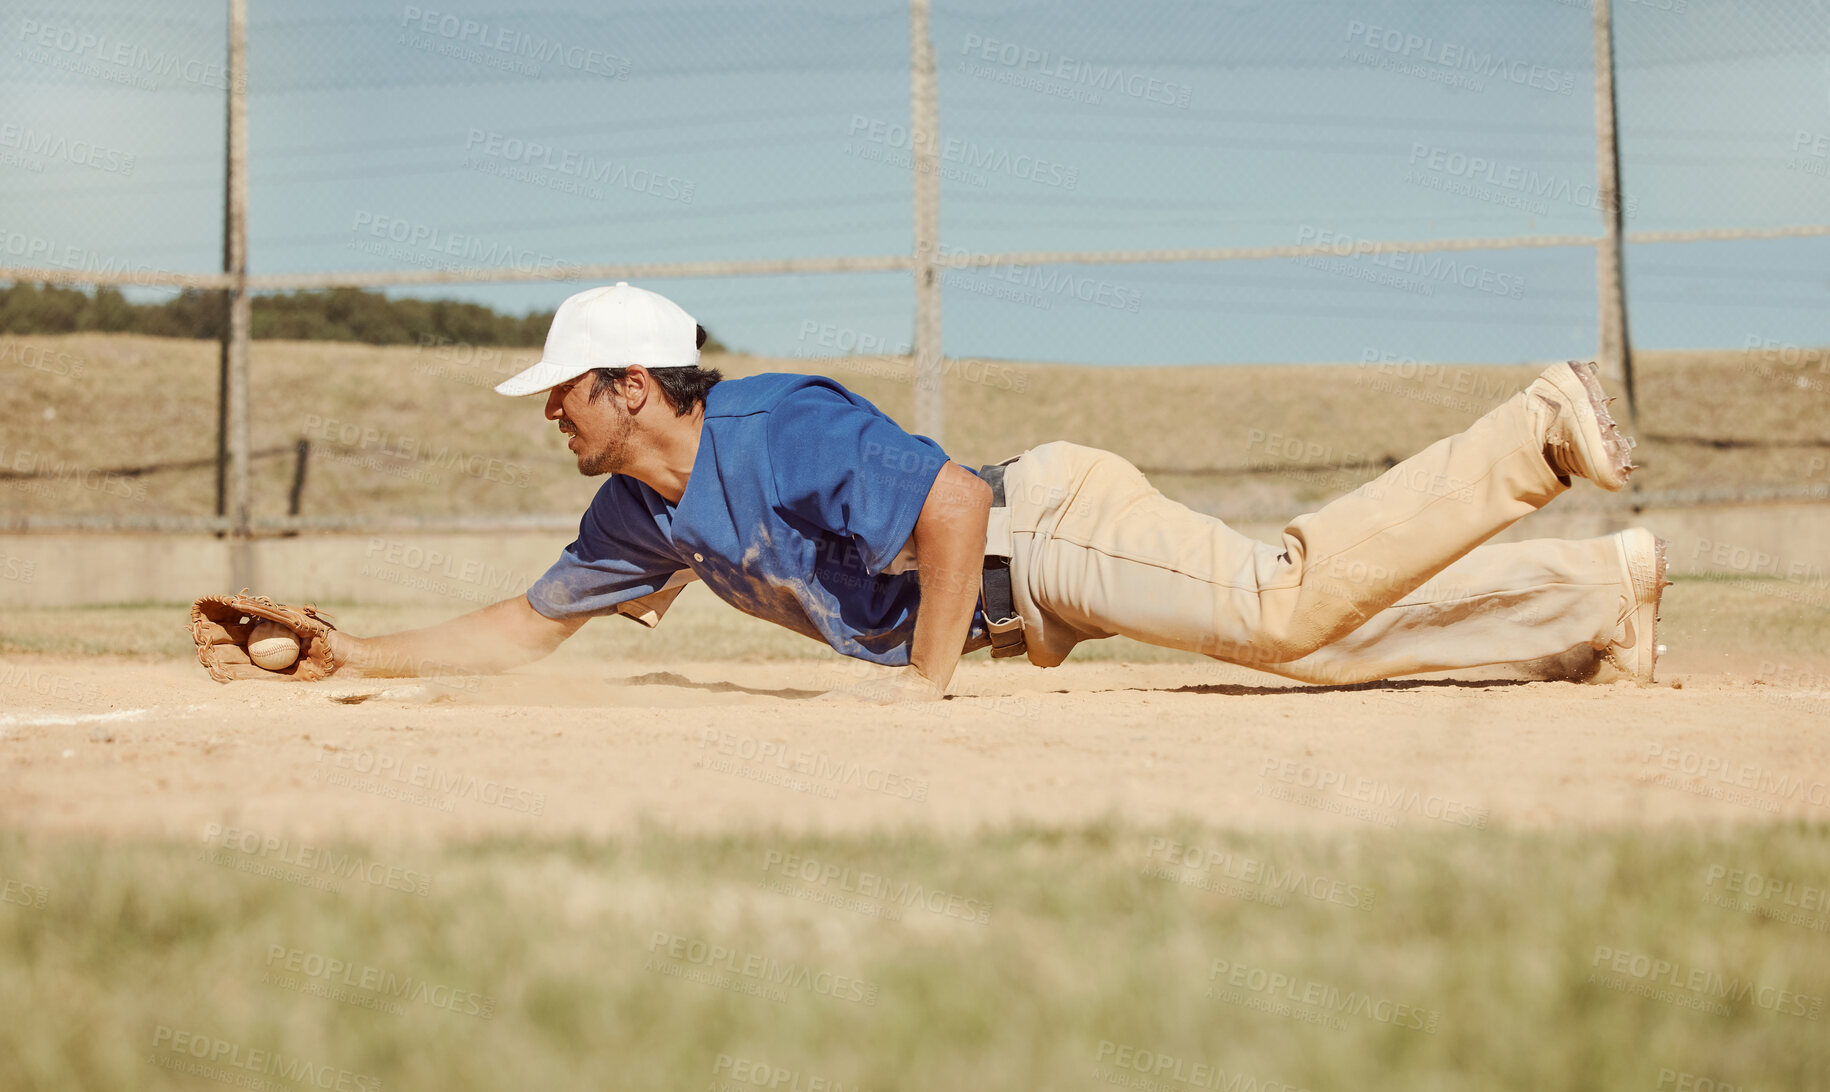 Buy stock photo Sports, action and a man catching baseball, sliding in dust on floor with ball in baseball glove. Slide, dive and catch, baseball player on the ground during game, professional athlete on the field.